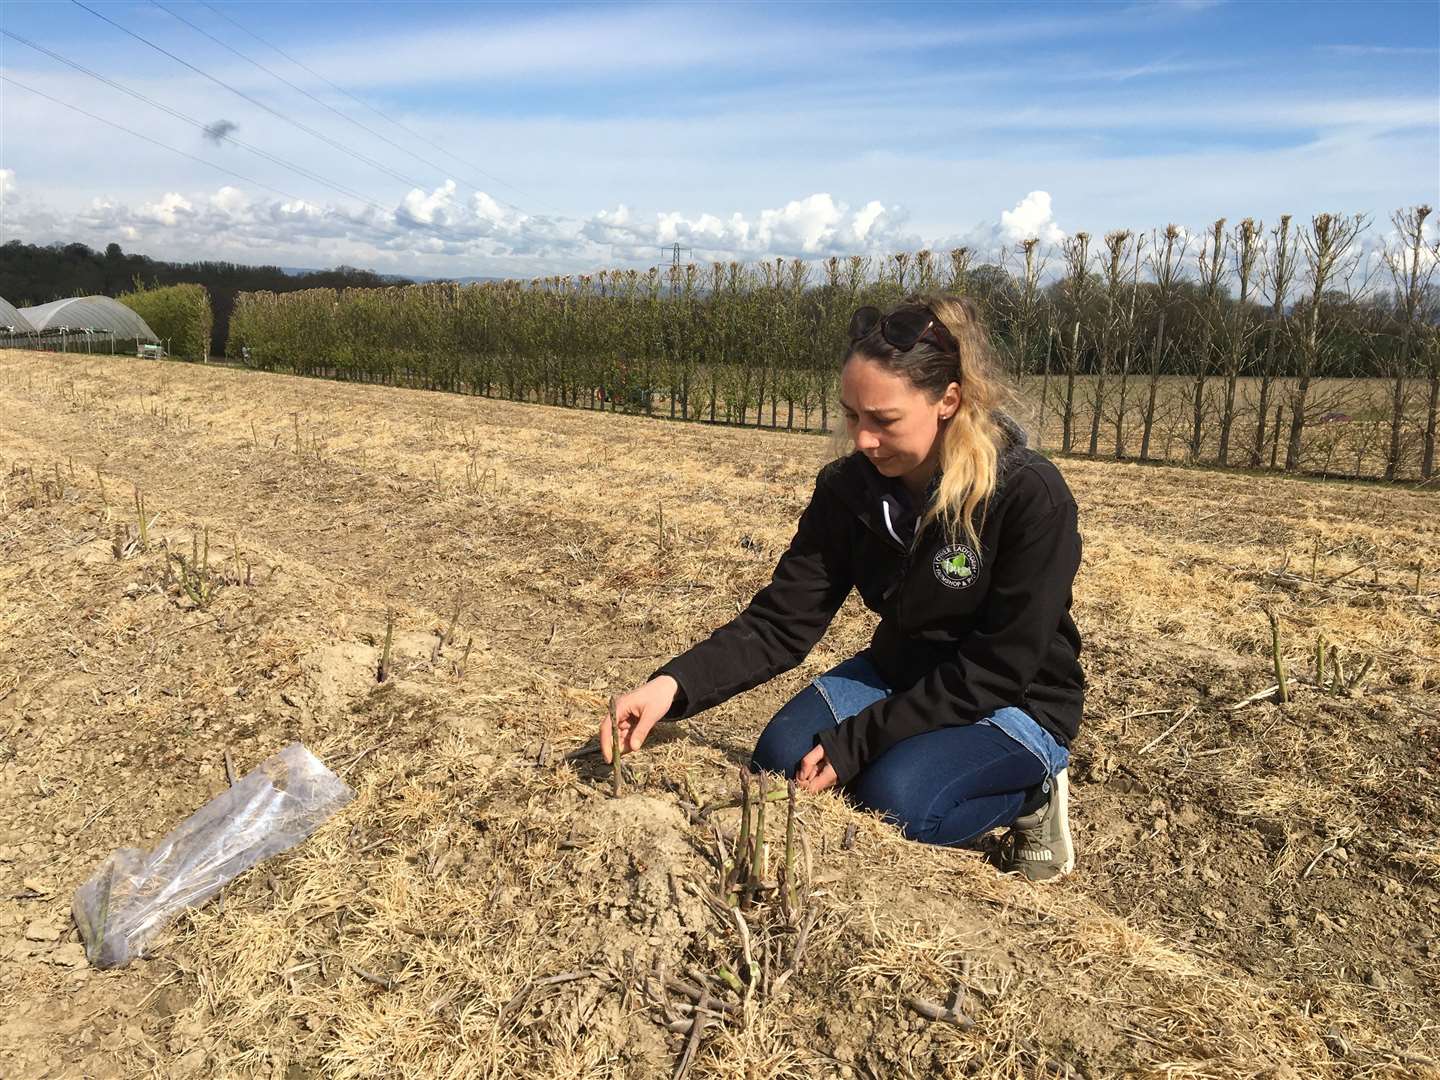 Suzie Kember picks some asparagus in the field